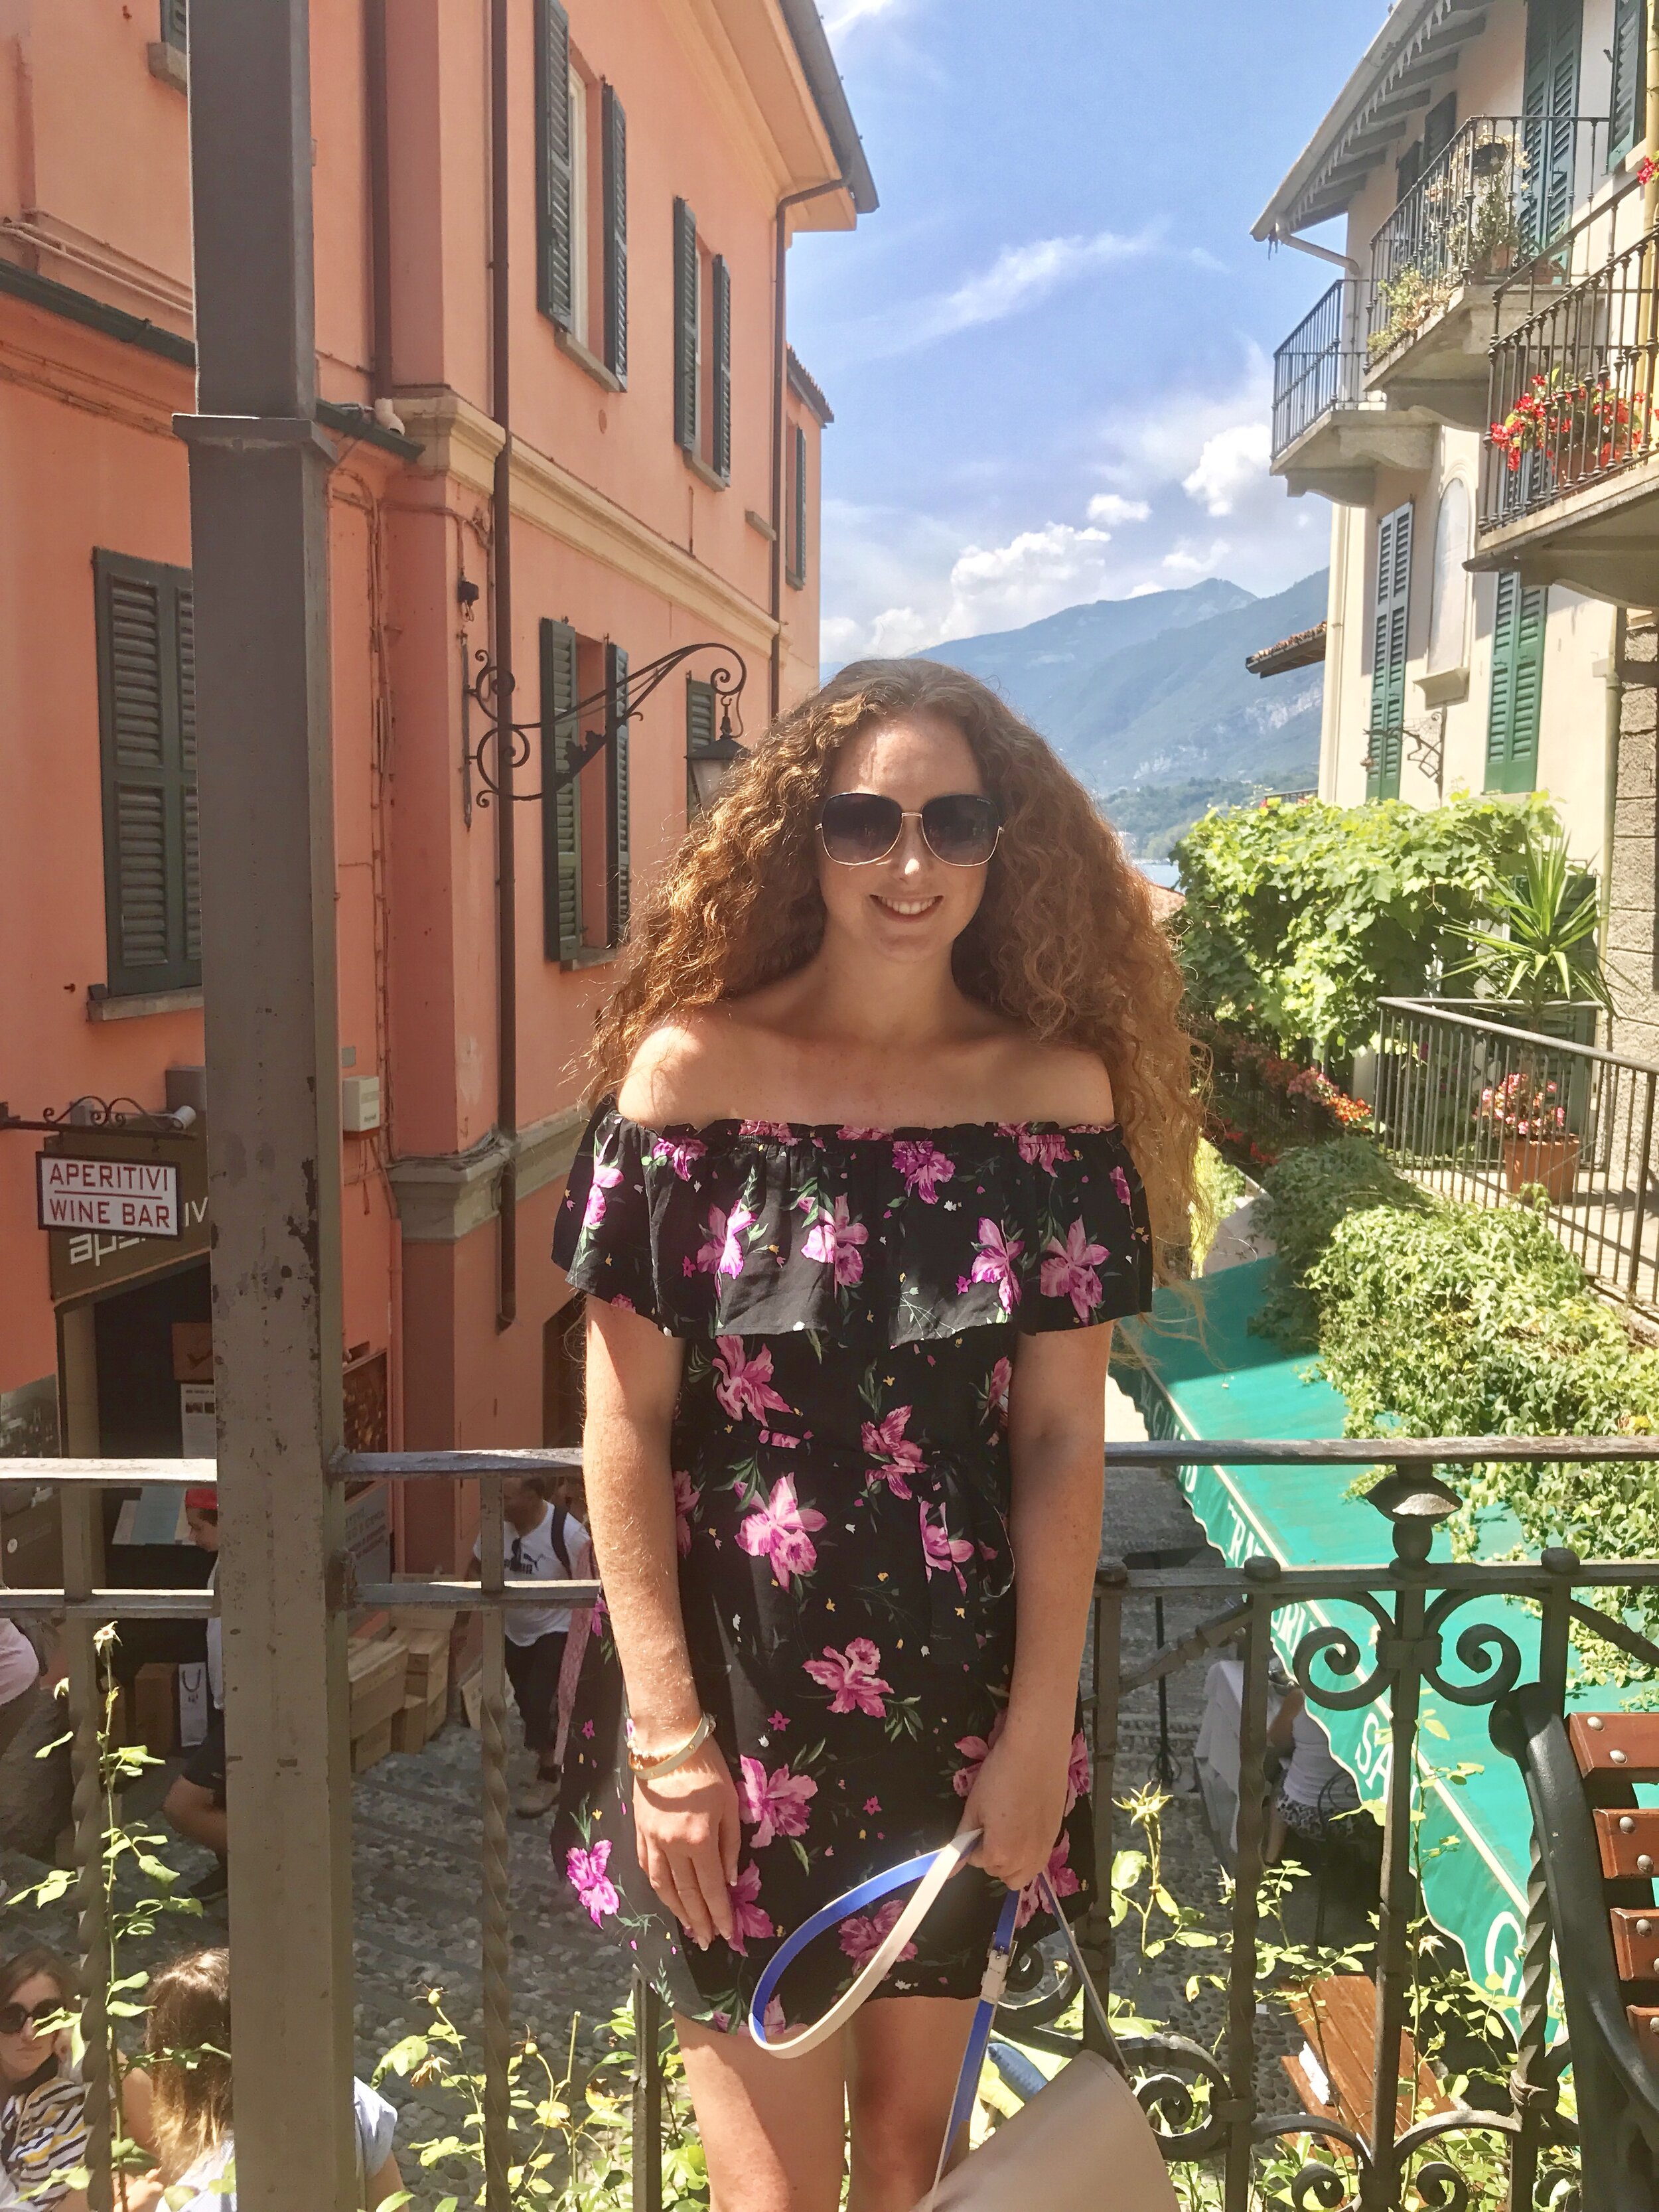 Lake Como Travel Guide: One of my favorite places in Bellagio